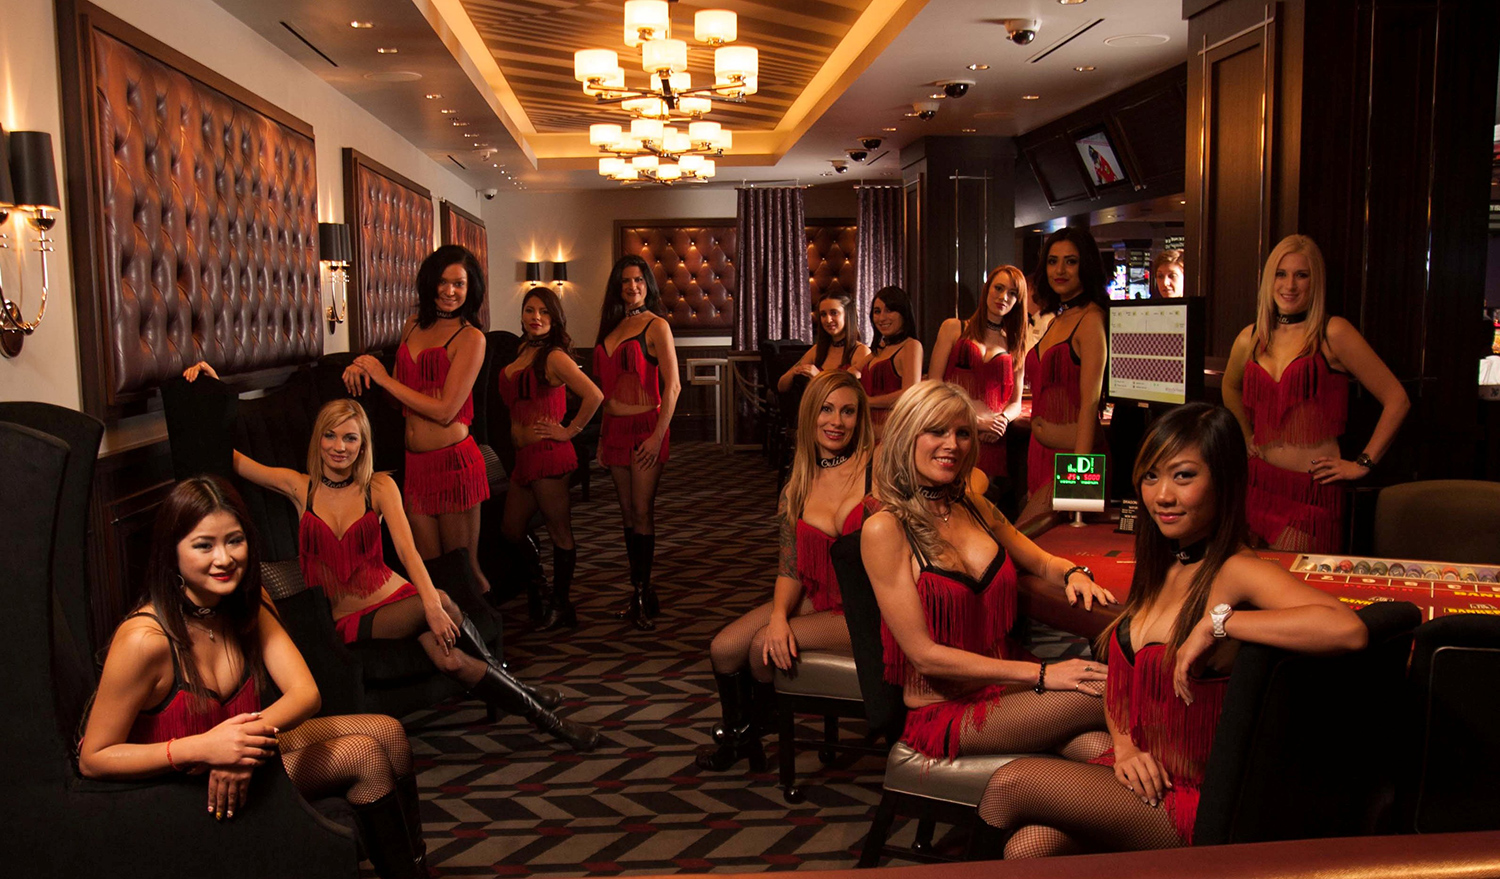 Inside the Scantily-Clad Casino "Party Pits" of Las Vegas - 